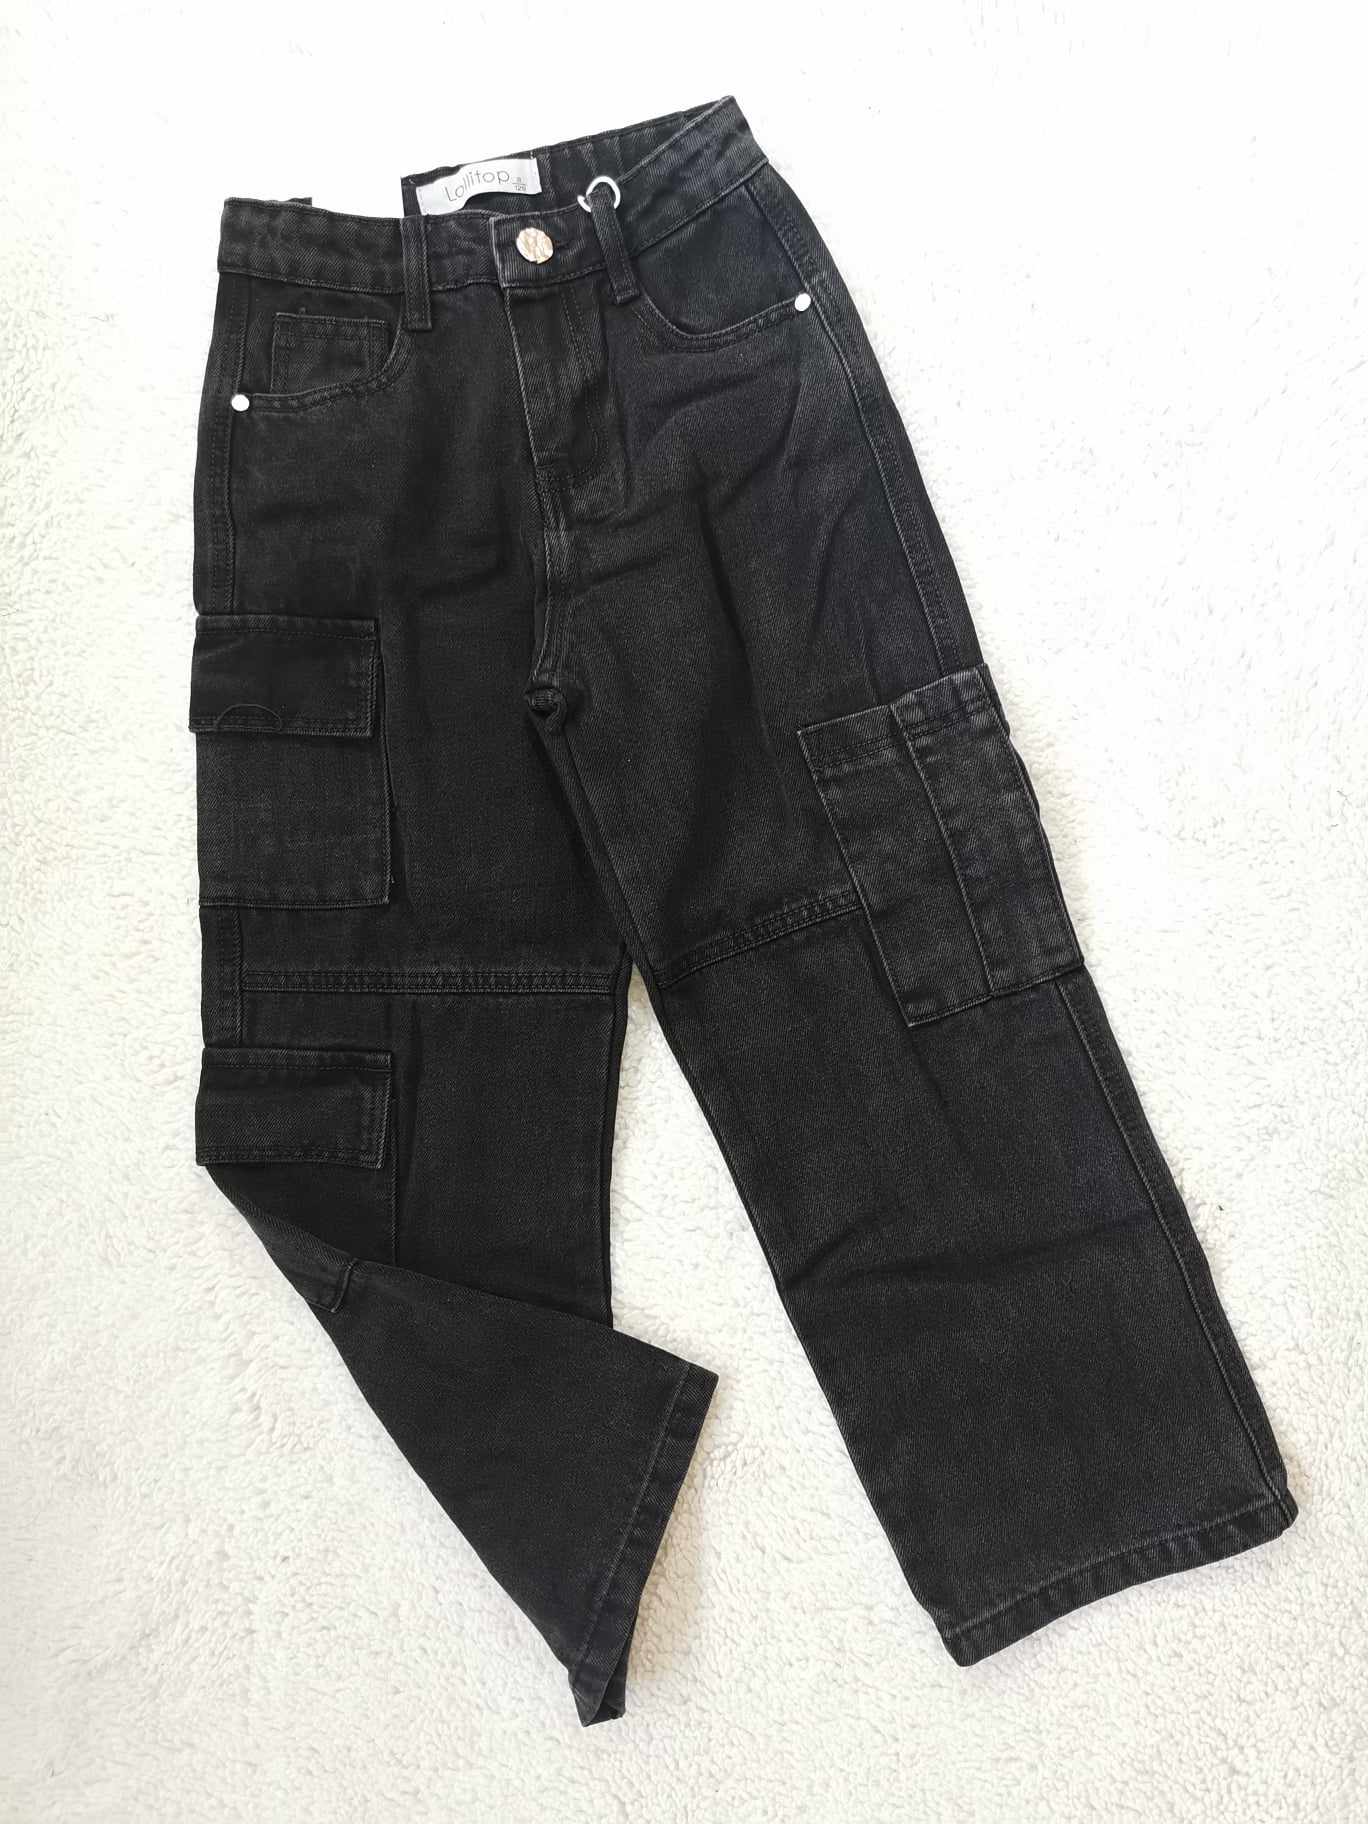 TROUSER LOLLITOP 23/24 MONOC. JEANS WITH SIDE POCKETS GIRL